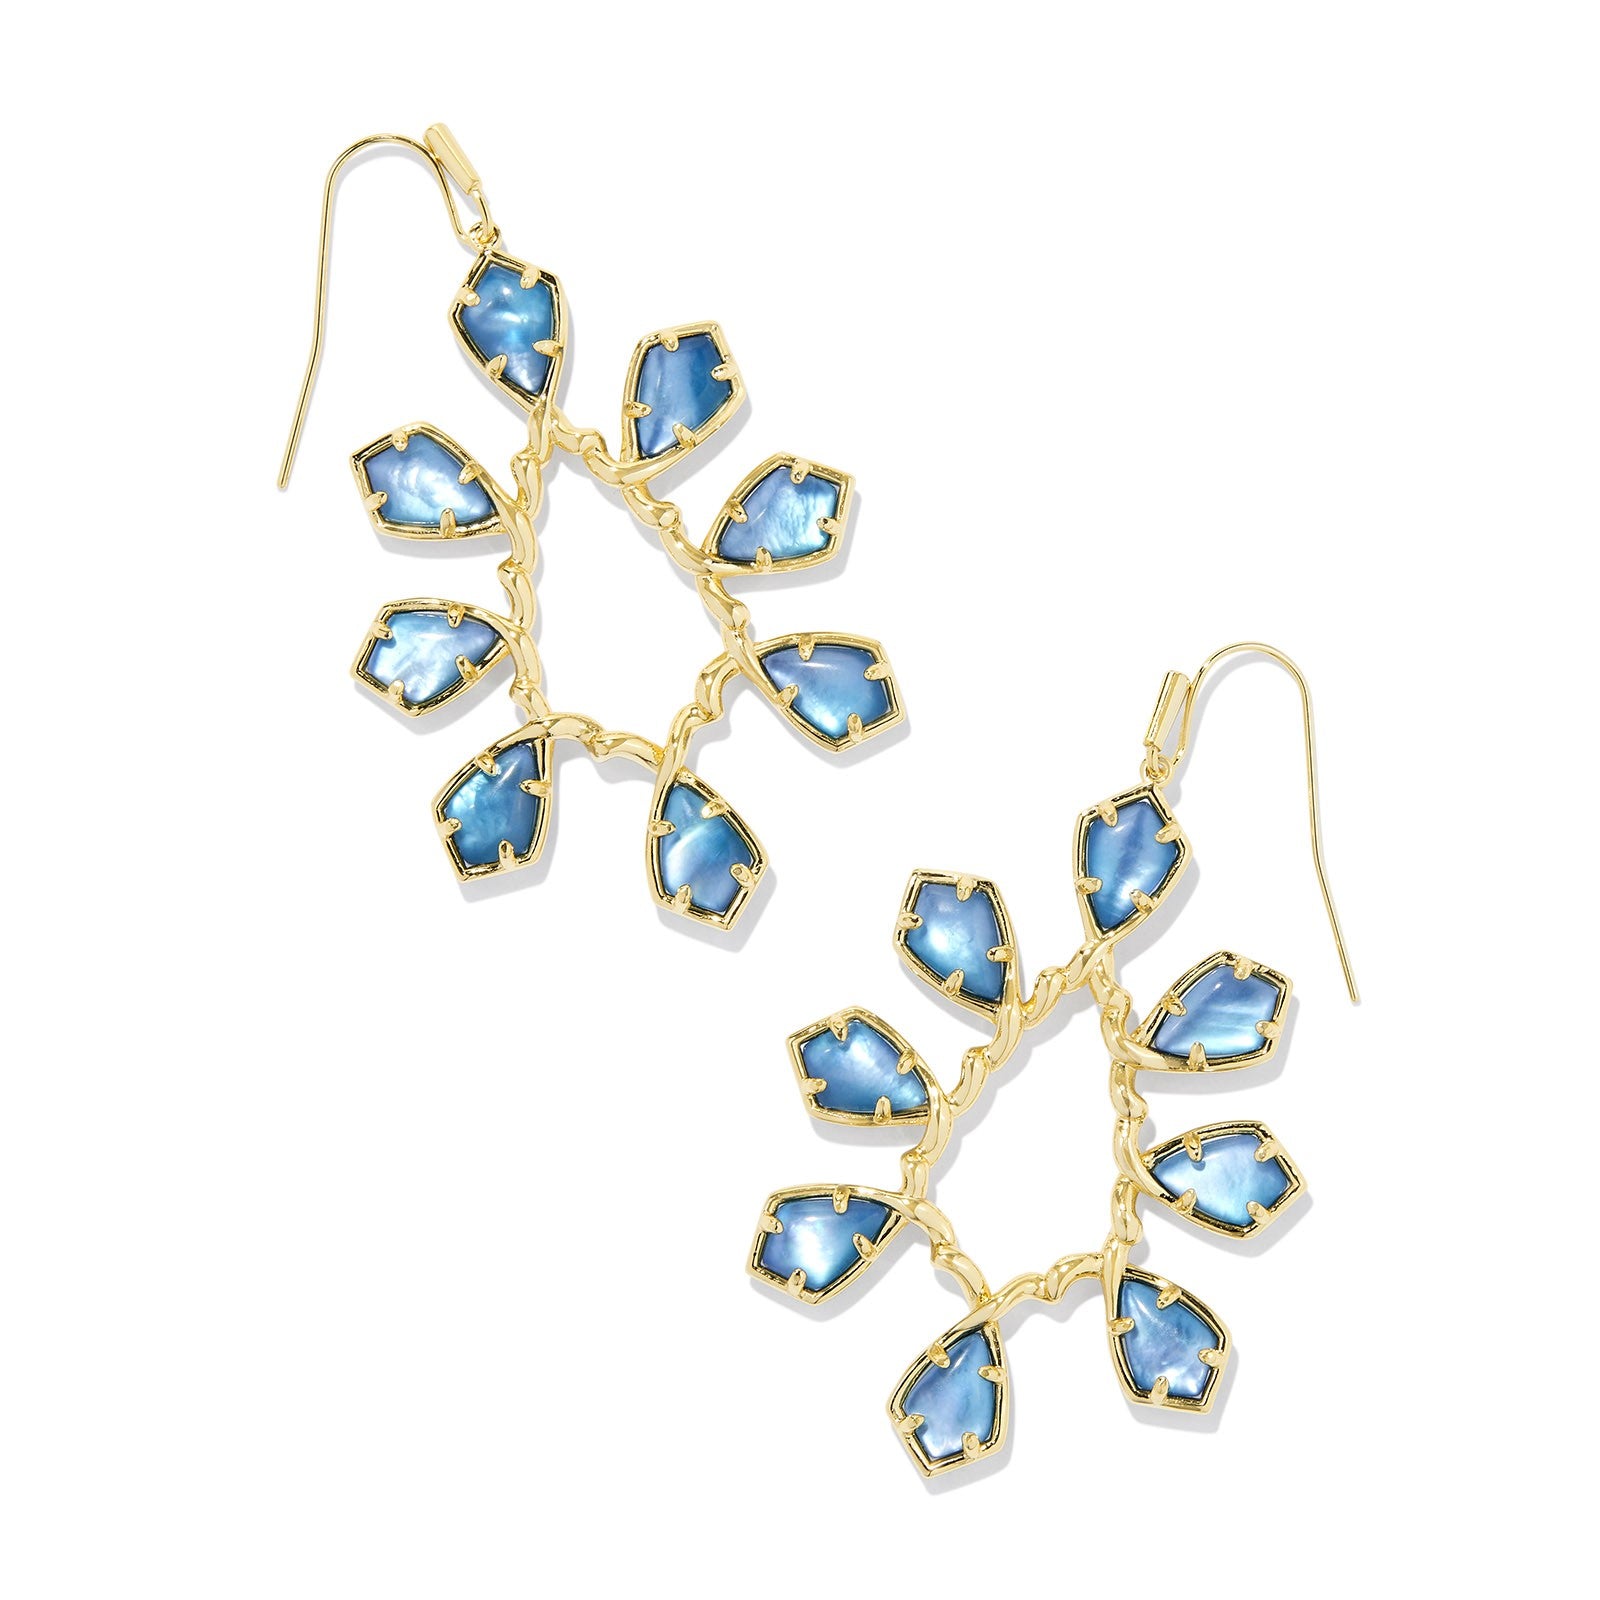 Kendra Scott | Camry Gold Open Frame Drop Earrings in Indigo Watercolor Illusion - Giddy Up Glamour Boutique